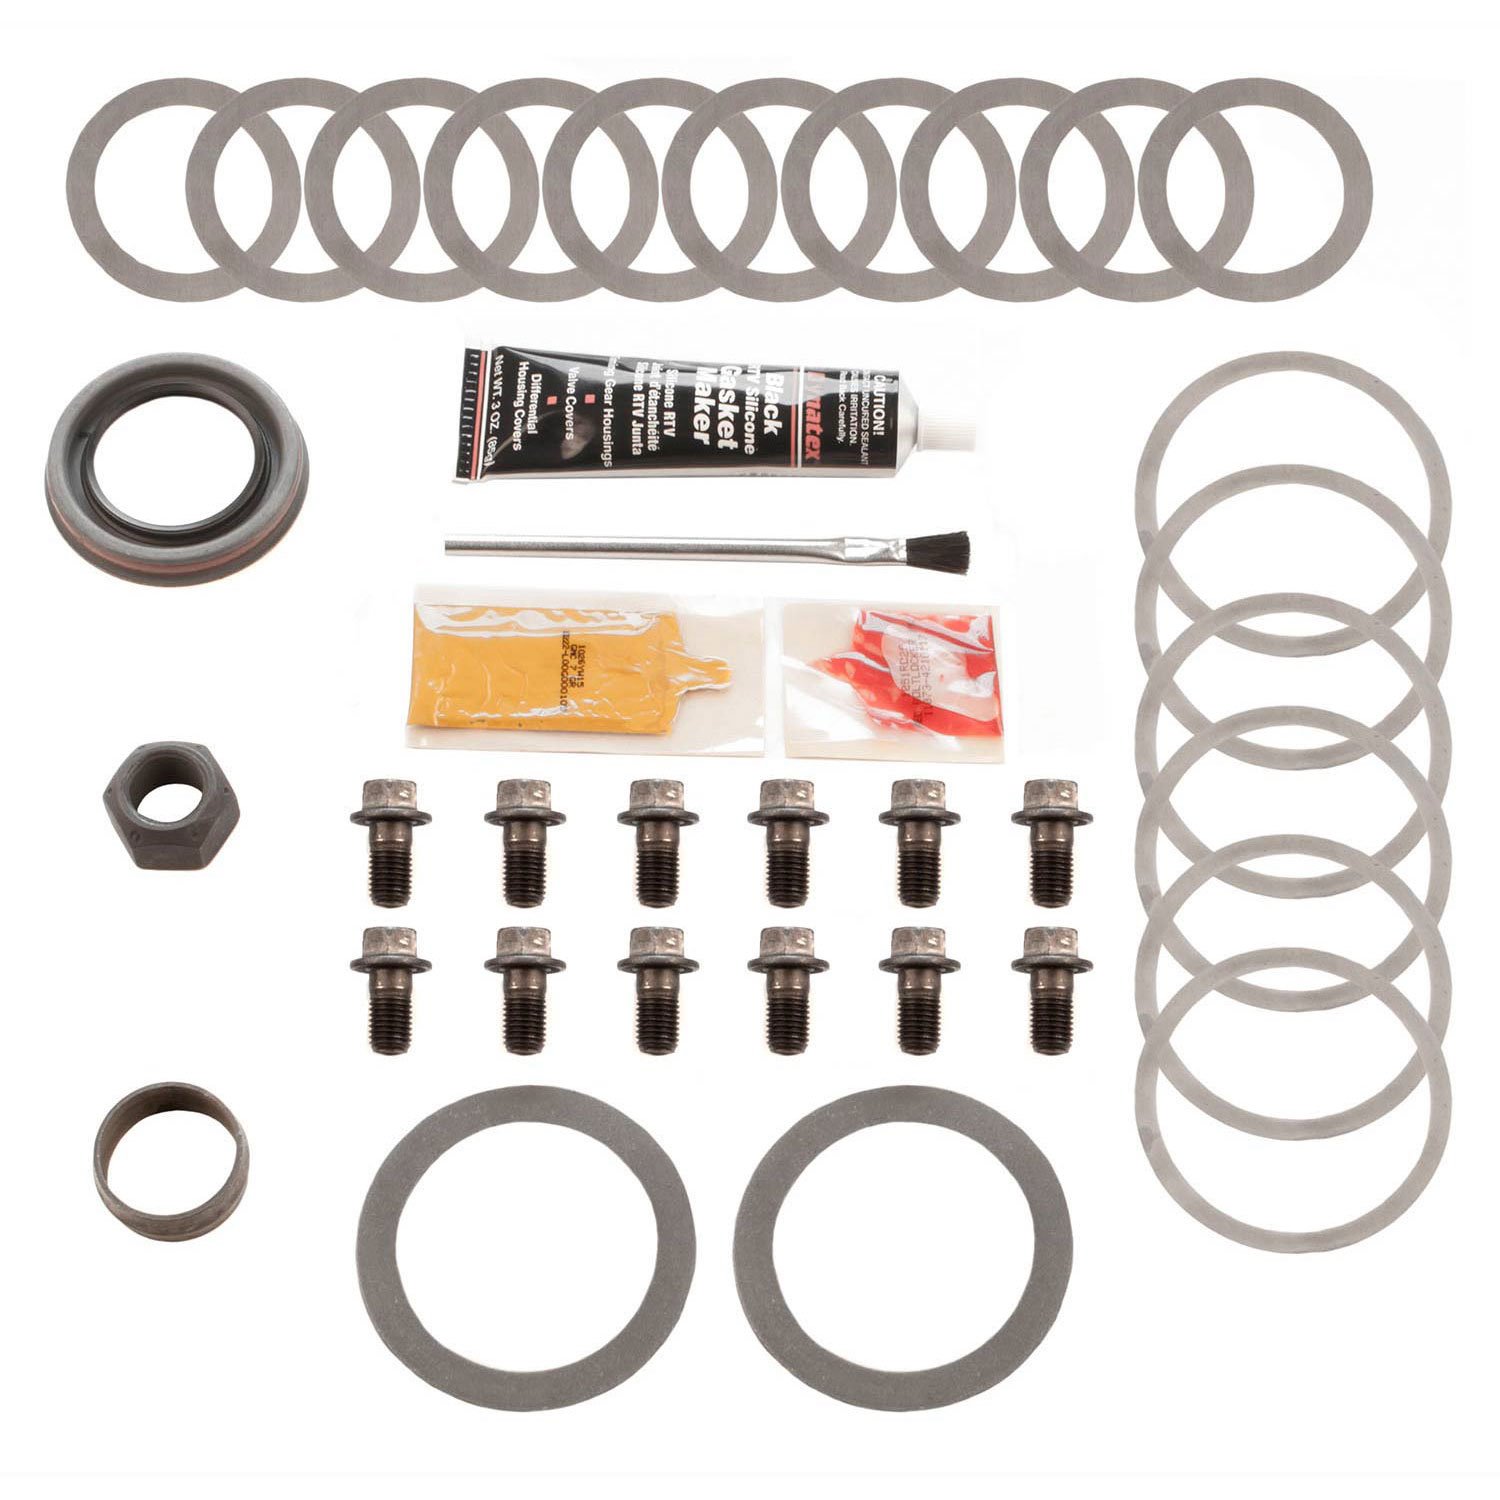 Super Bearing Kit; Incl. Pinion-Carrier Shims/Pinion Nut/Ring Gear Bolts/Gear Marking Compound/Pinio